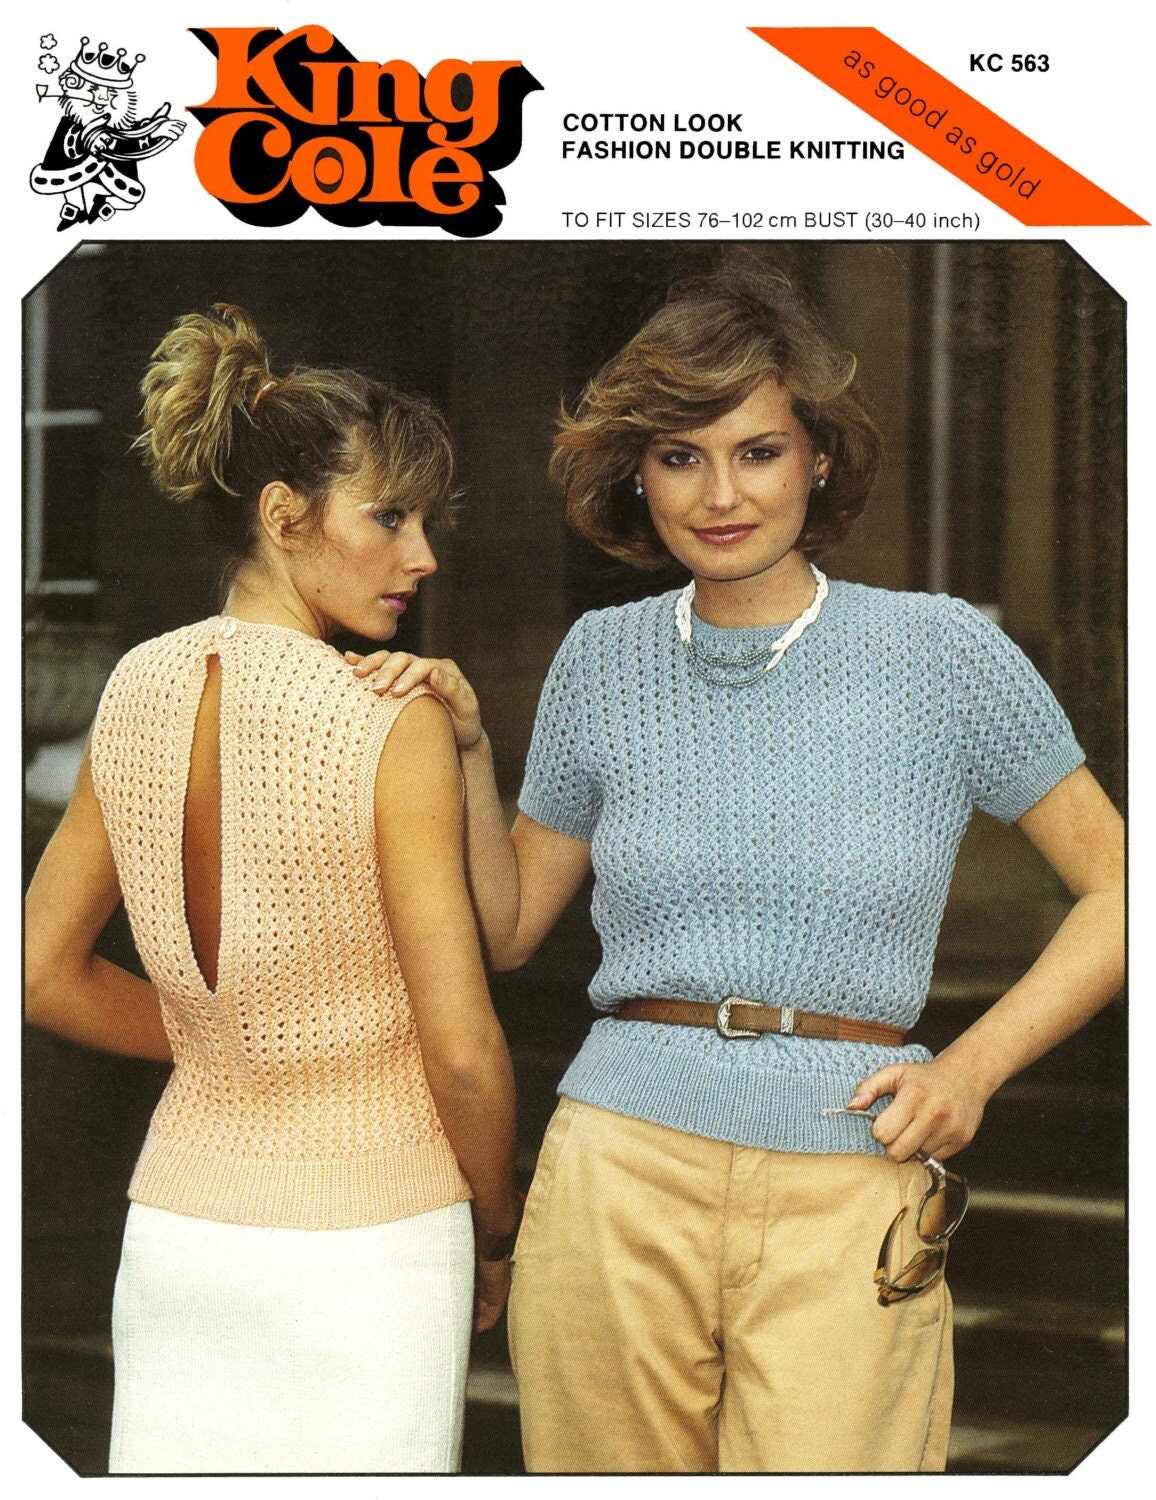 Ladies Sleeveless and Short Sleeved Sweater / Jumper, 30"-40" Bust, DK, 80s Knitting Pattern, King Cole 563